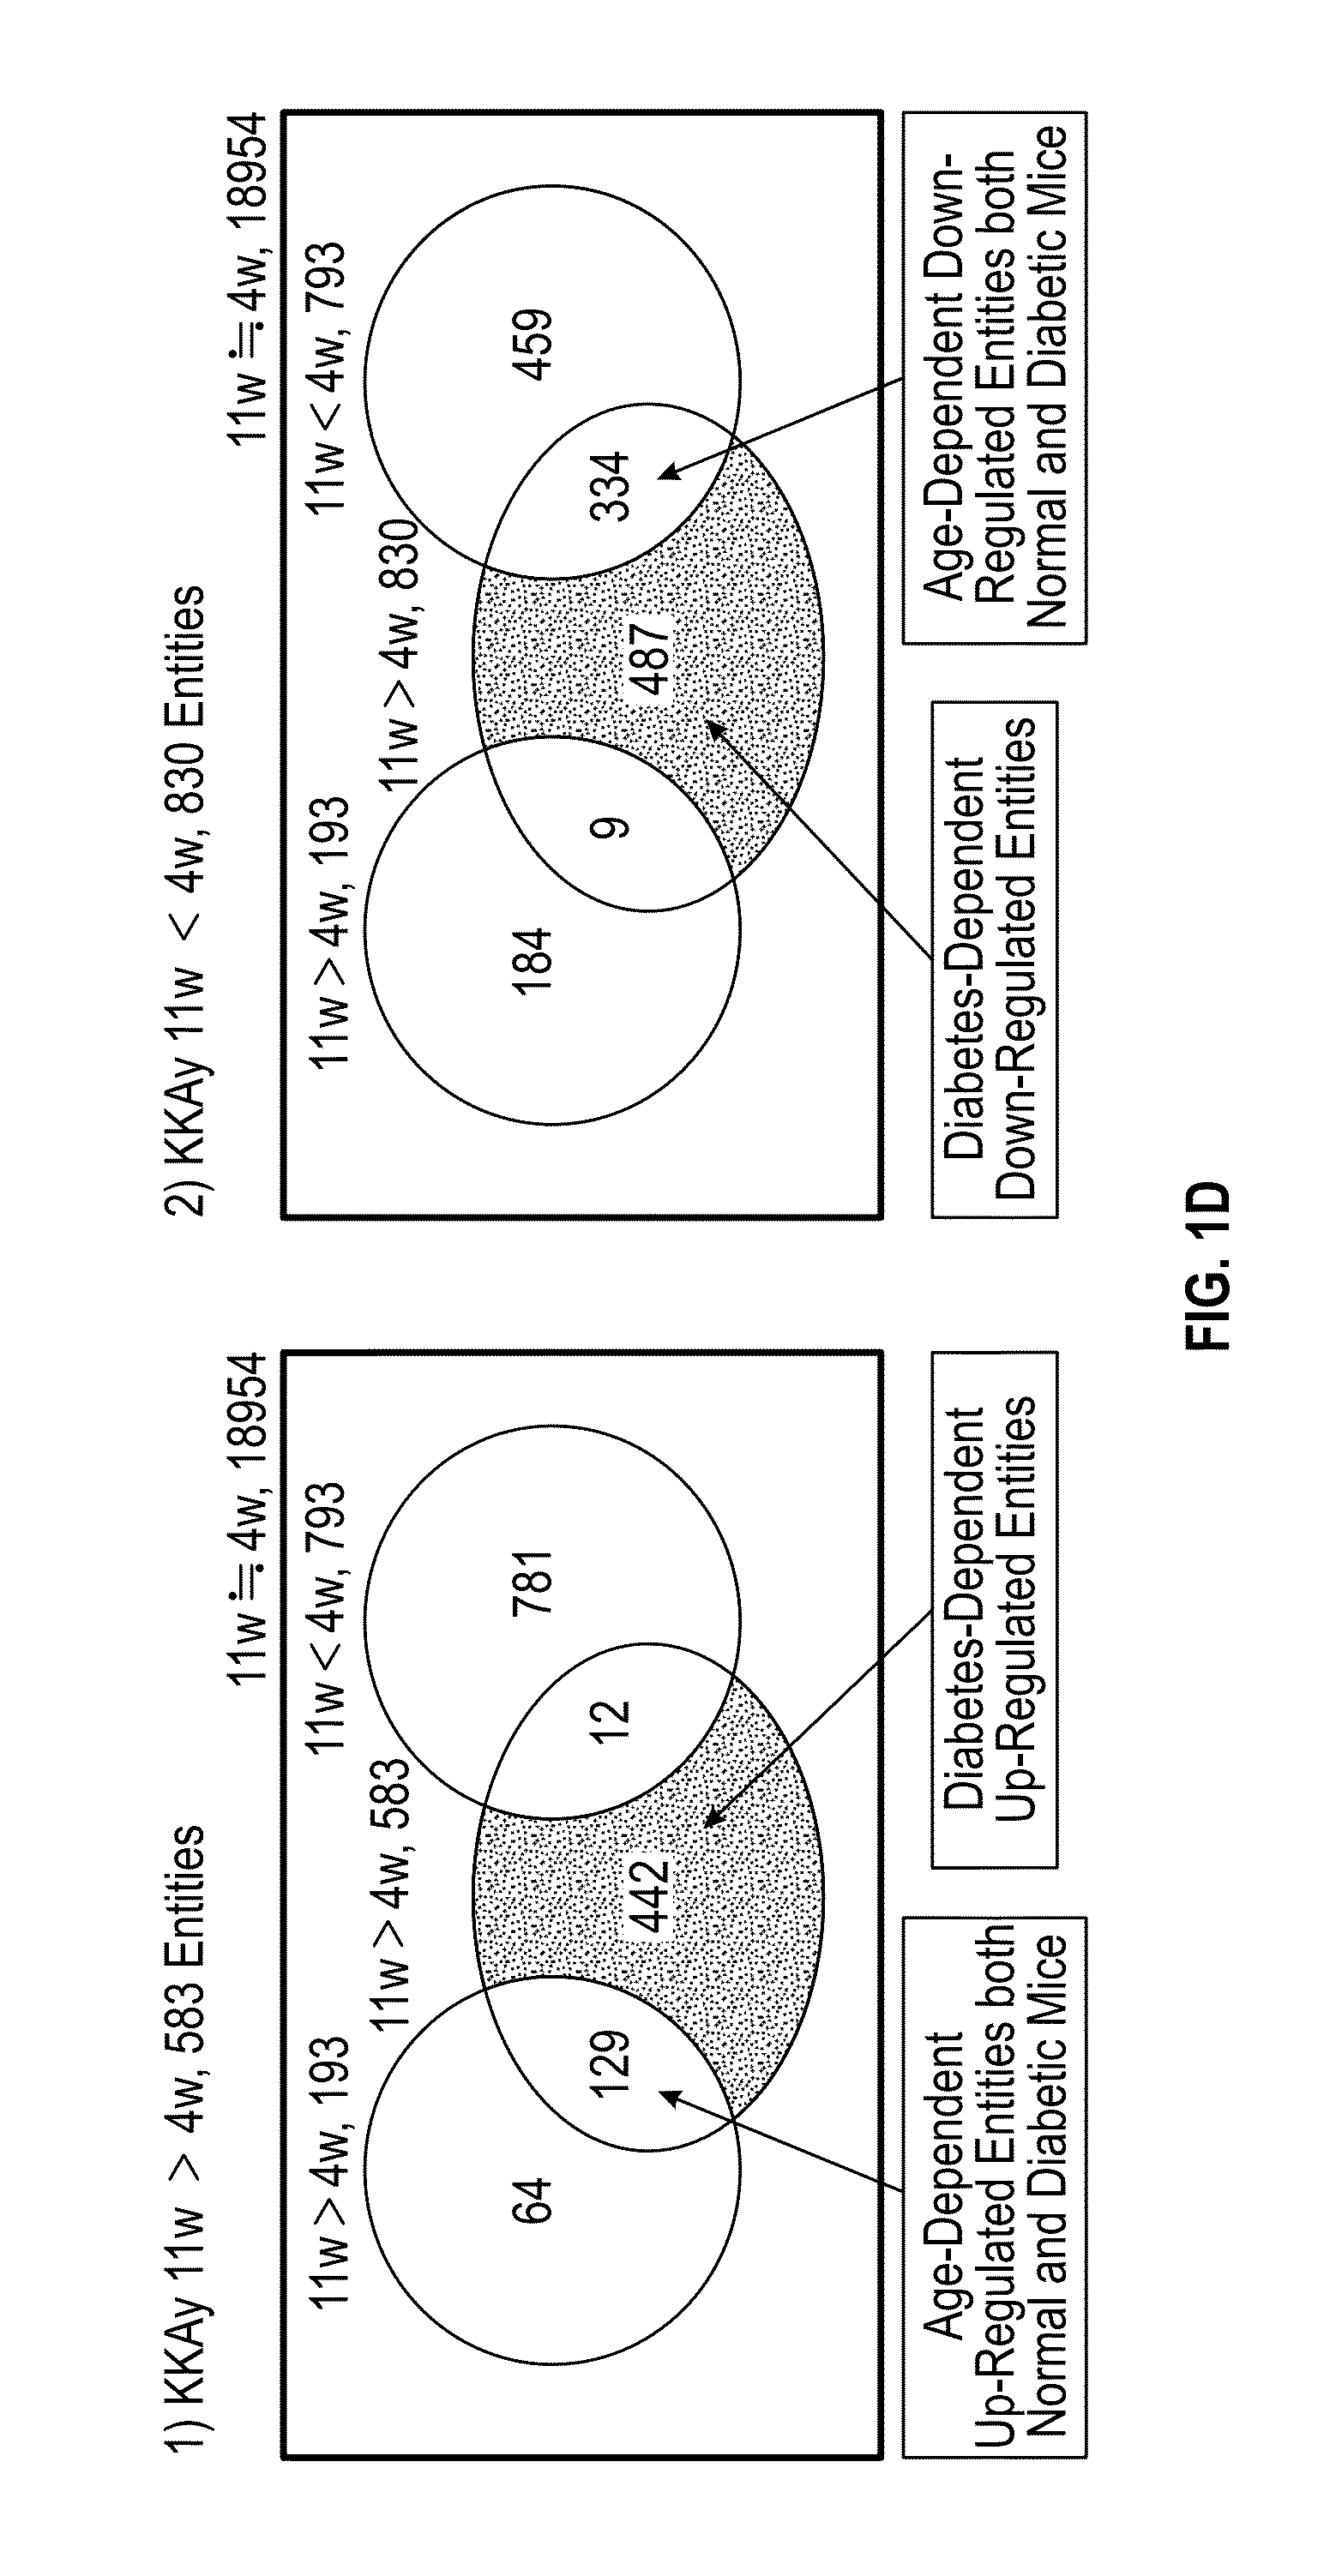 Method for treating and preventing type 2 diabetes